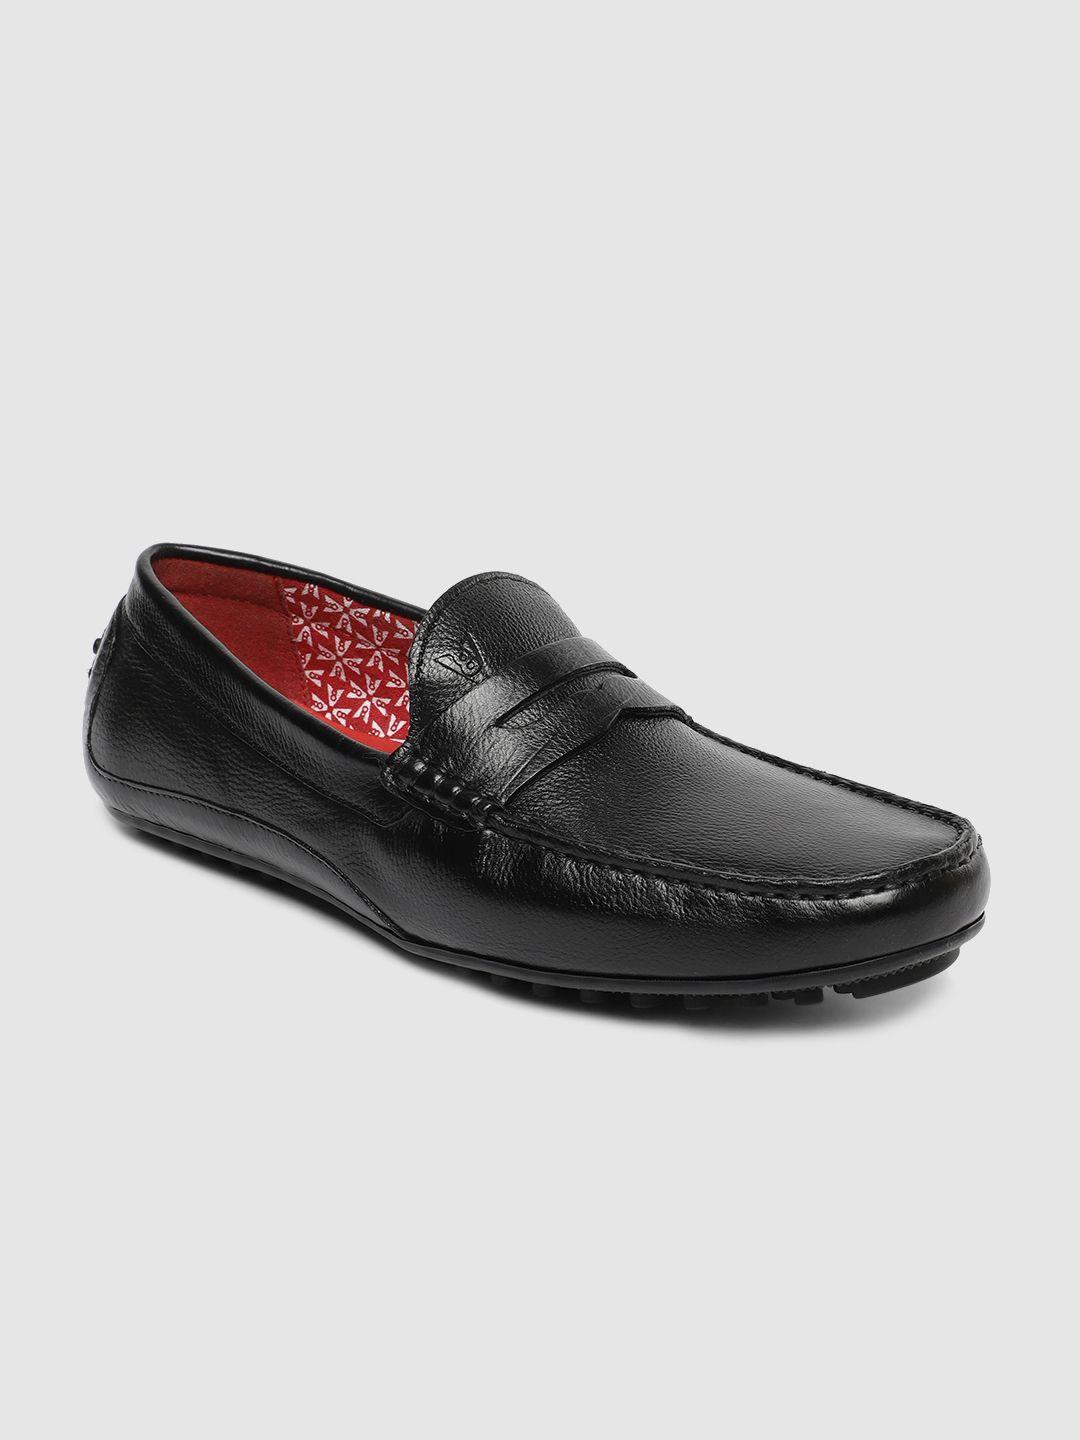 v8 by ruosh men black leather loafers